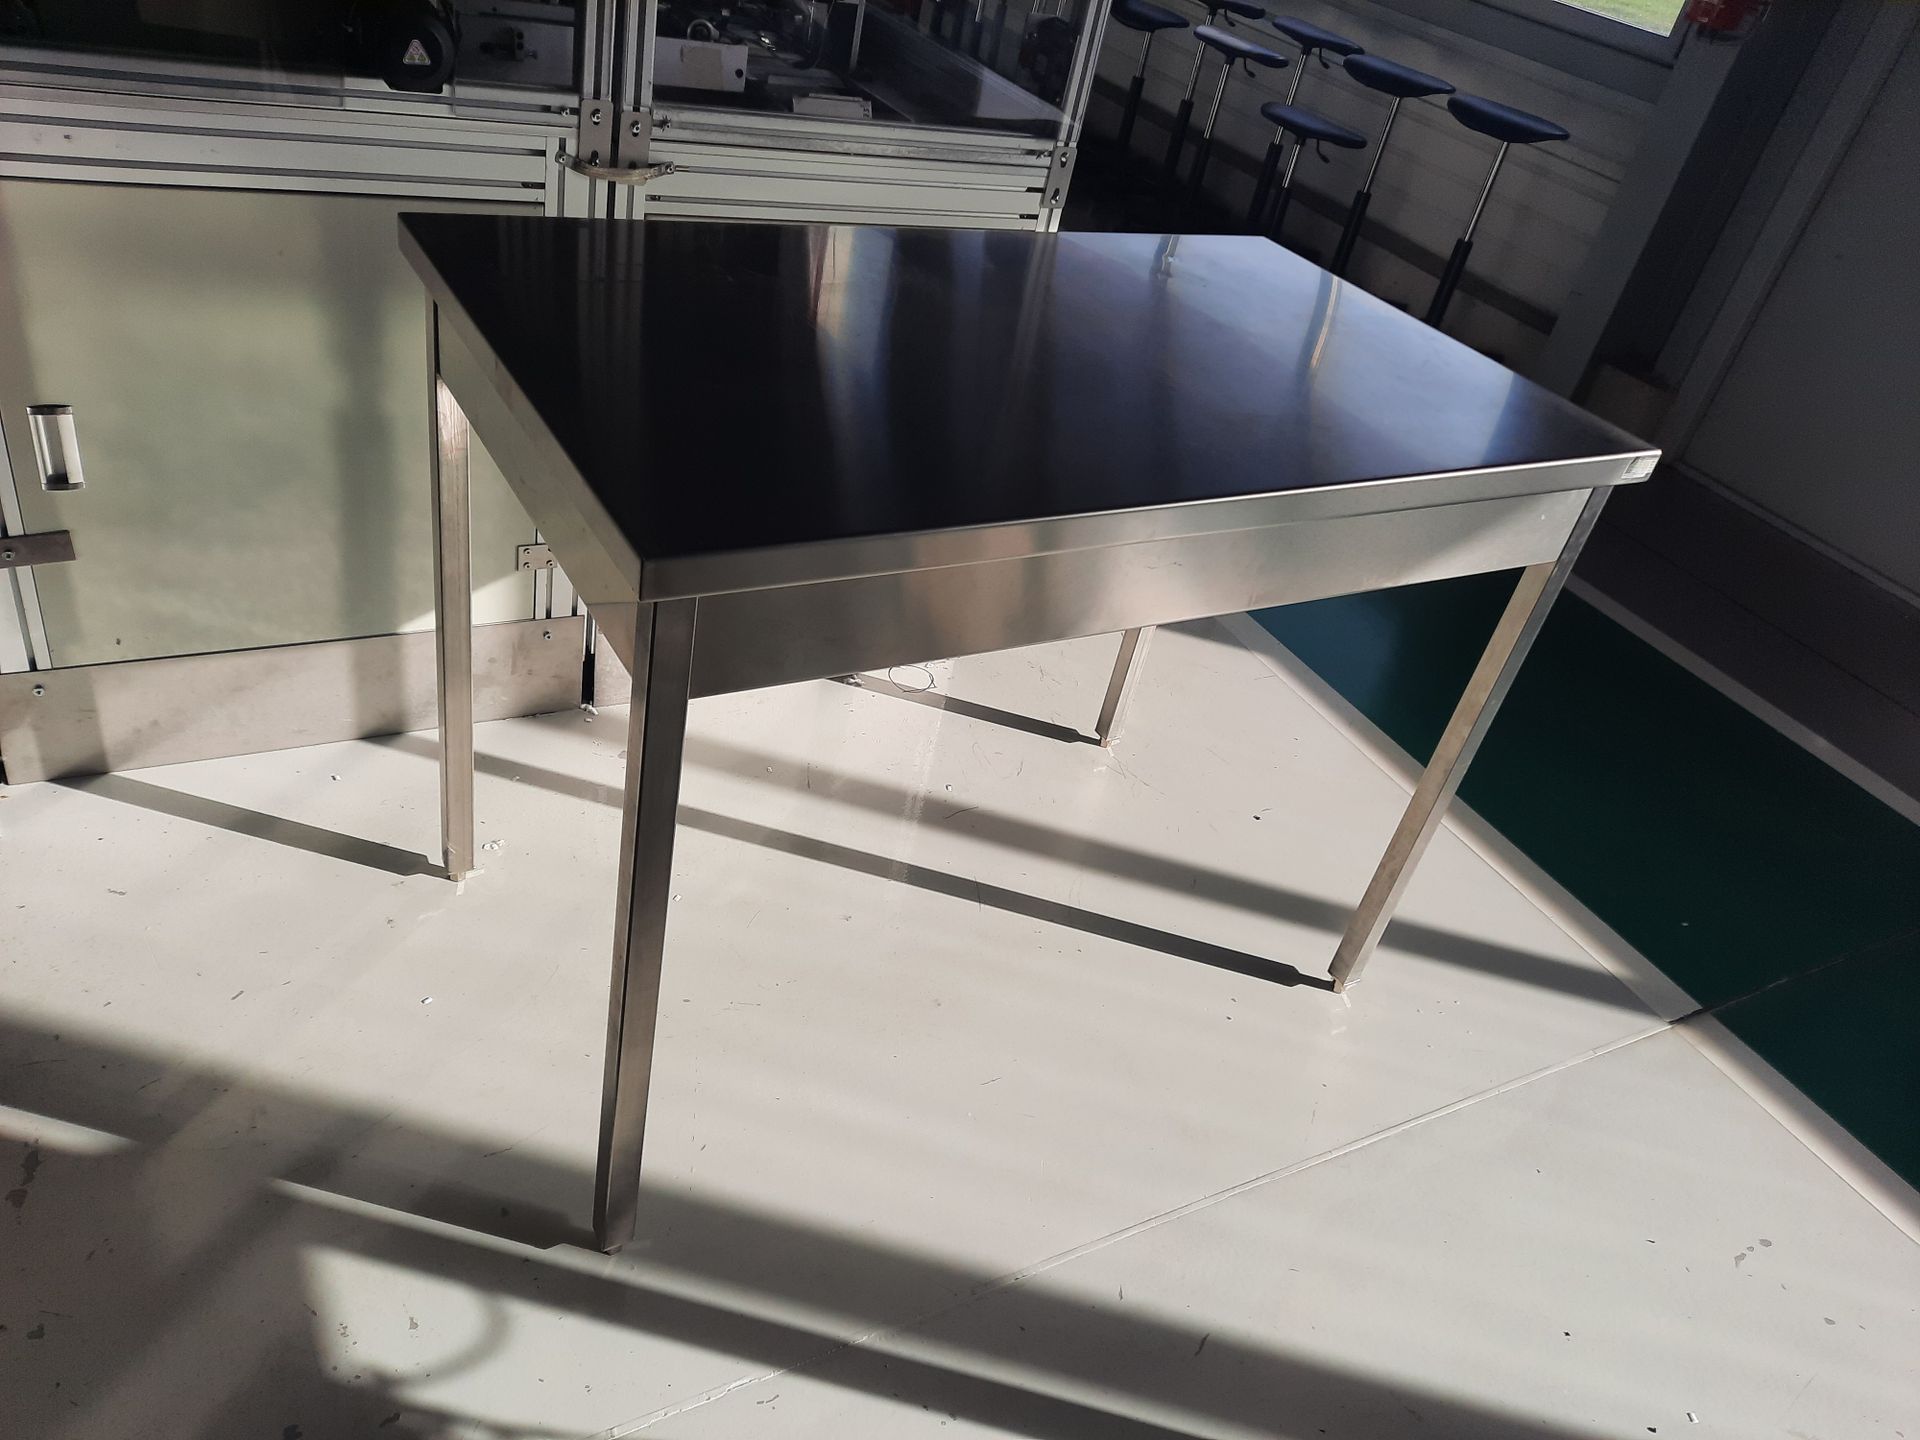 Null 1 BOURGEAT stainless steel table, size 1,200 x 700 mm